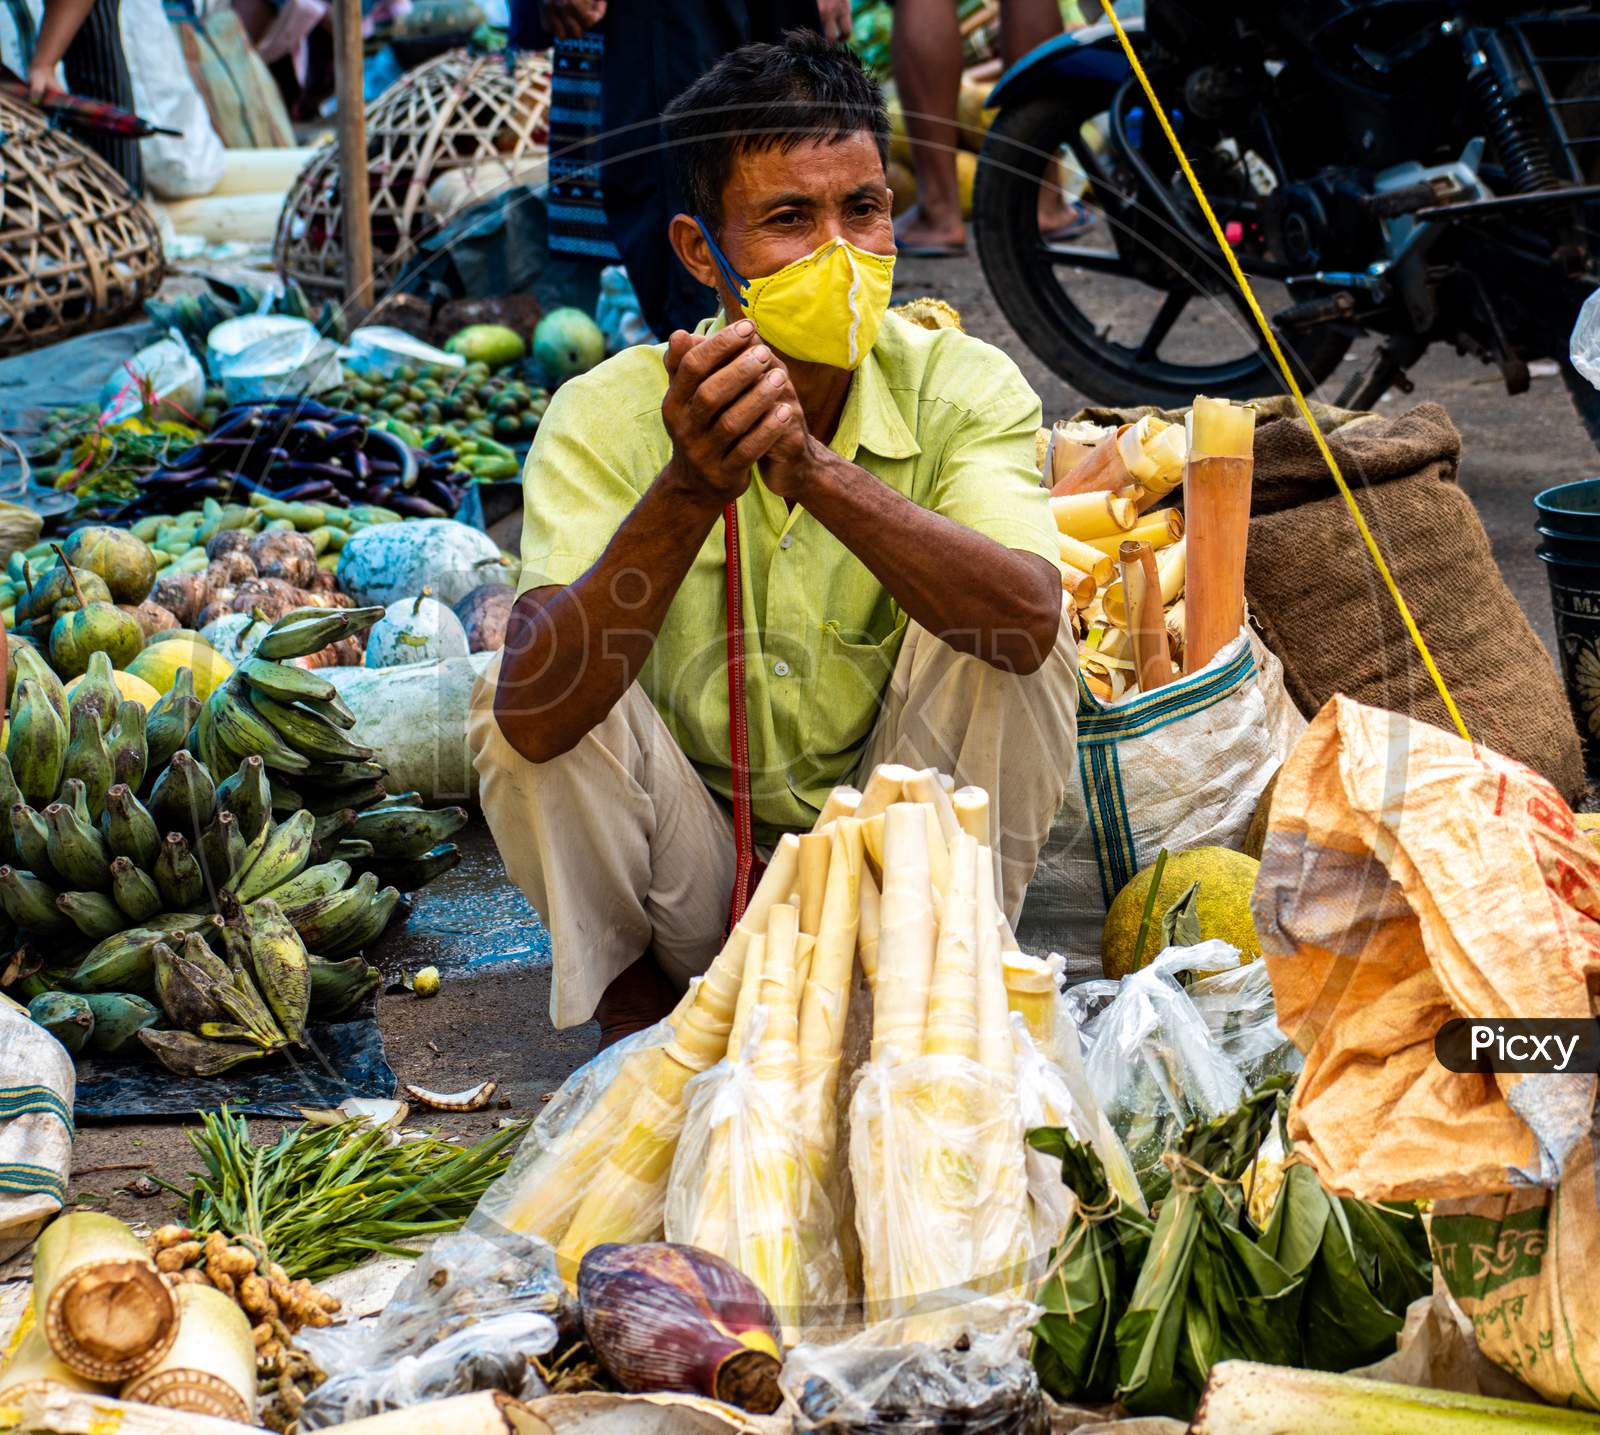 An unidentified vendor selling vegetables